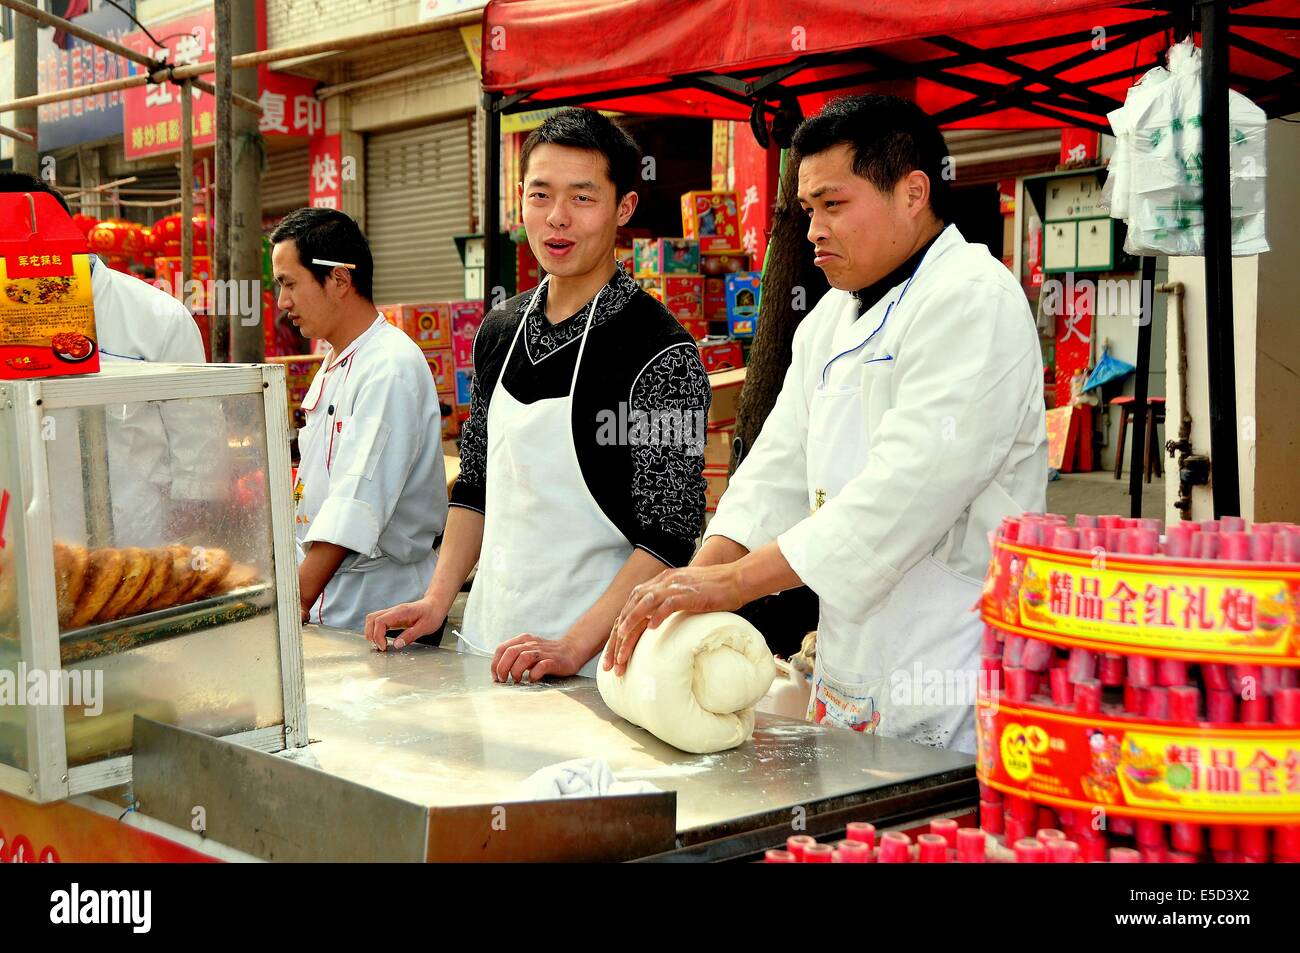 JUN LE TOWN, CHINA:  Chefs at work kneading dough and preparing the famous Jun Le Town Chinese Pizzas Stock Photo